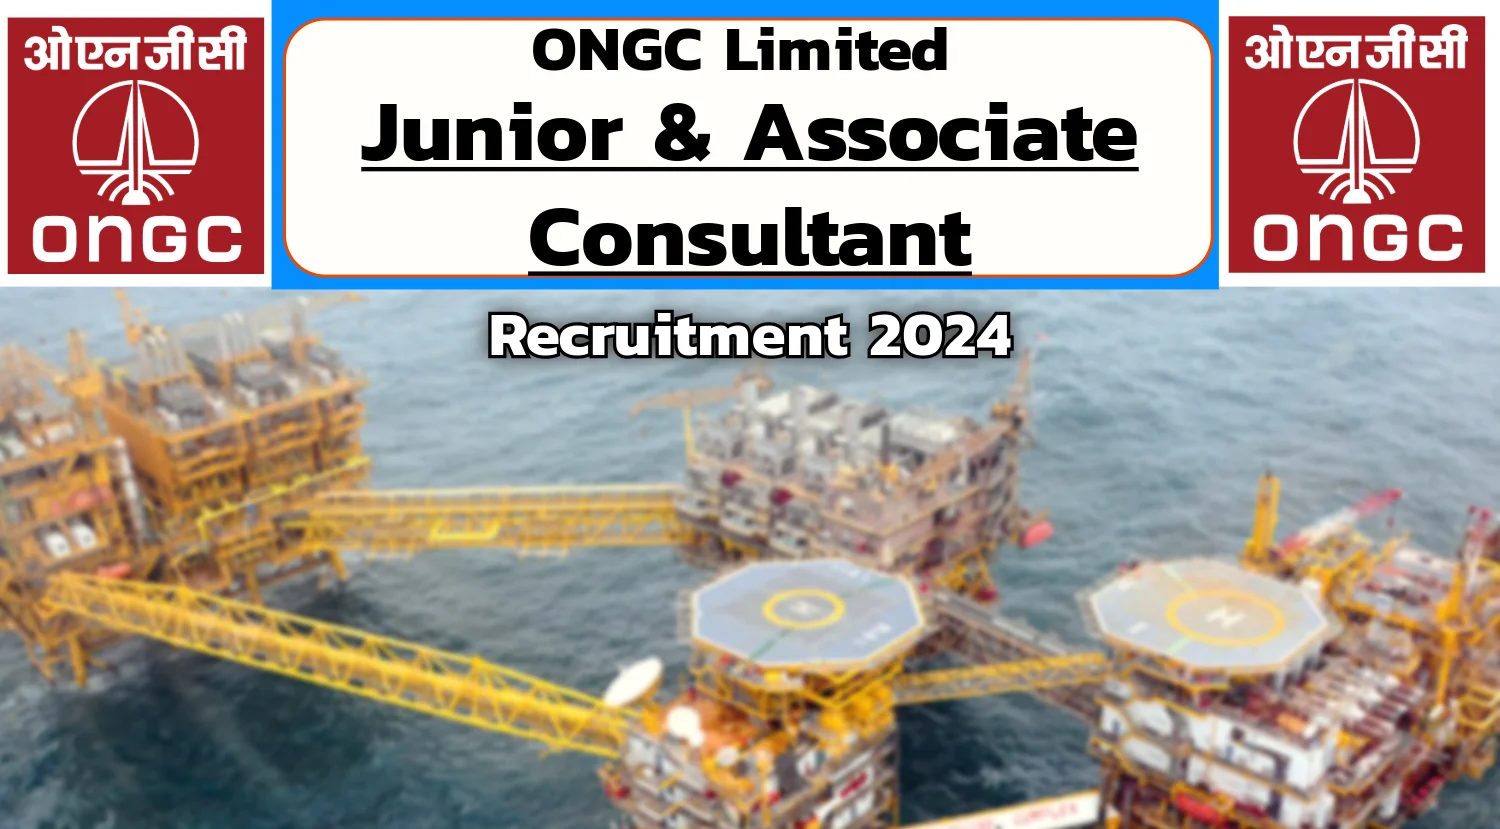 ONGC Recruitment 2024 Notification for Junior and Associate Consultant positions